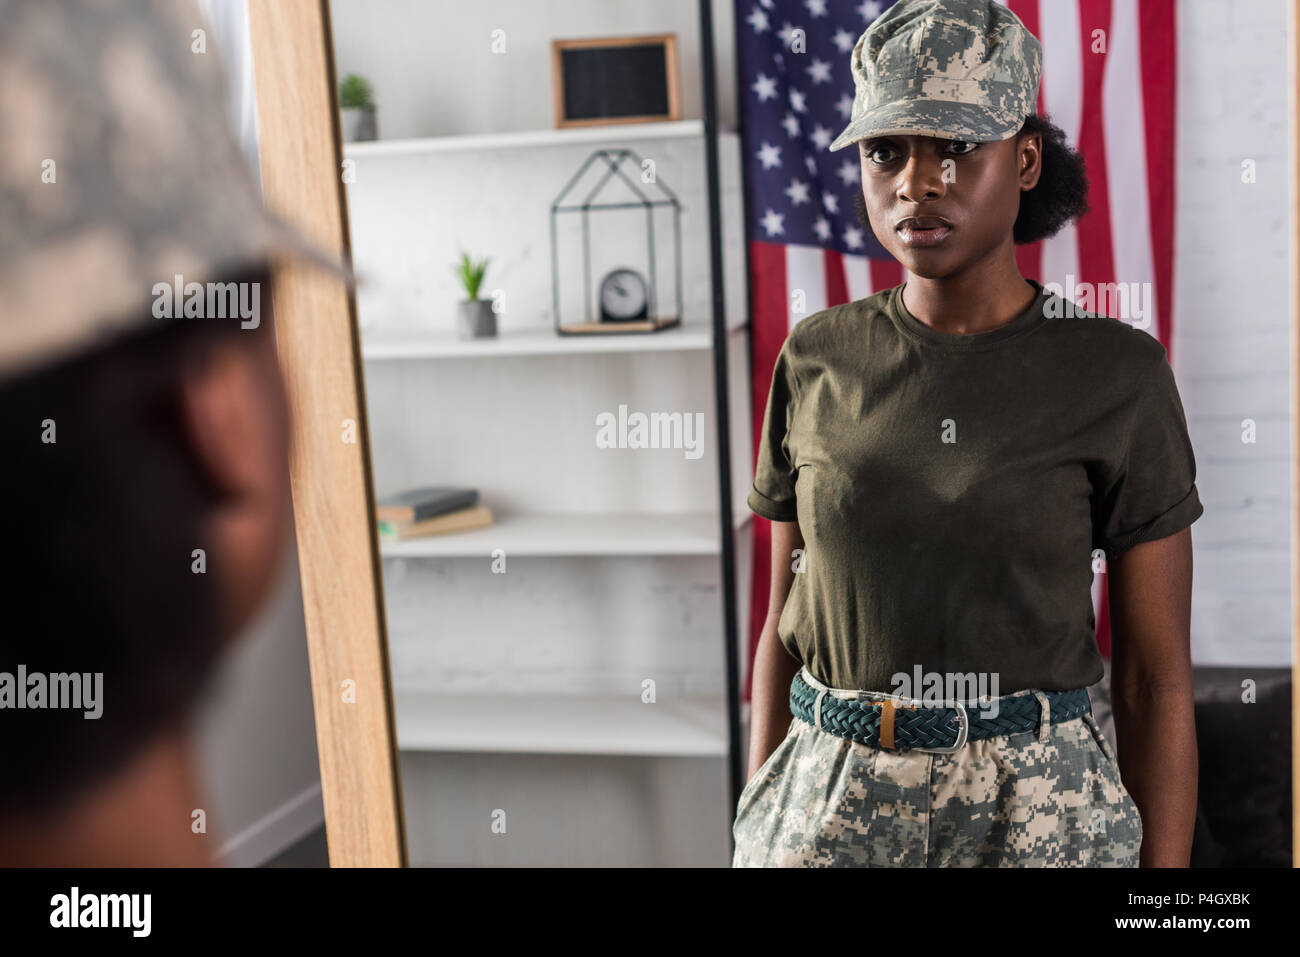 Female army soldier in camouflage clothes posing by the mirror Stock Photo